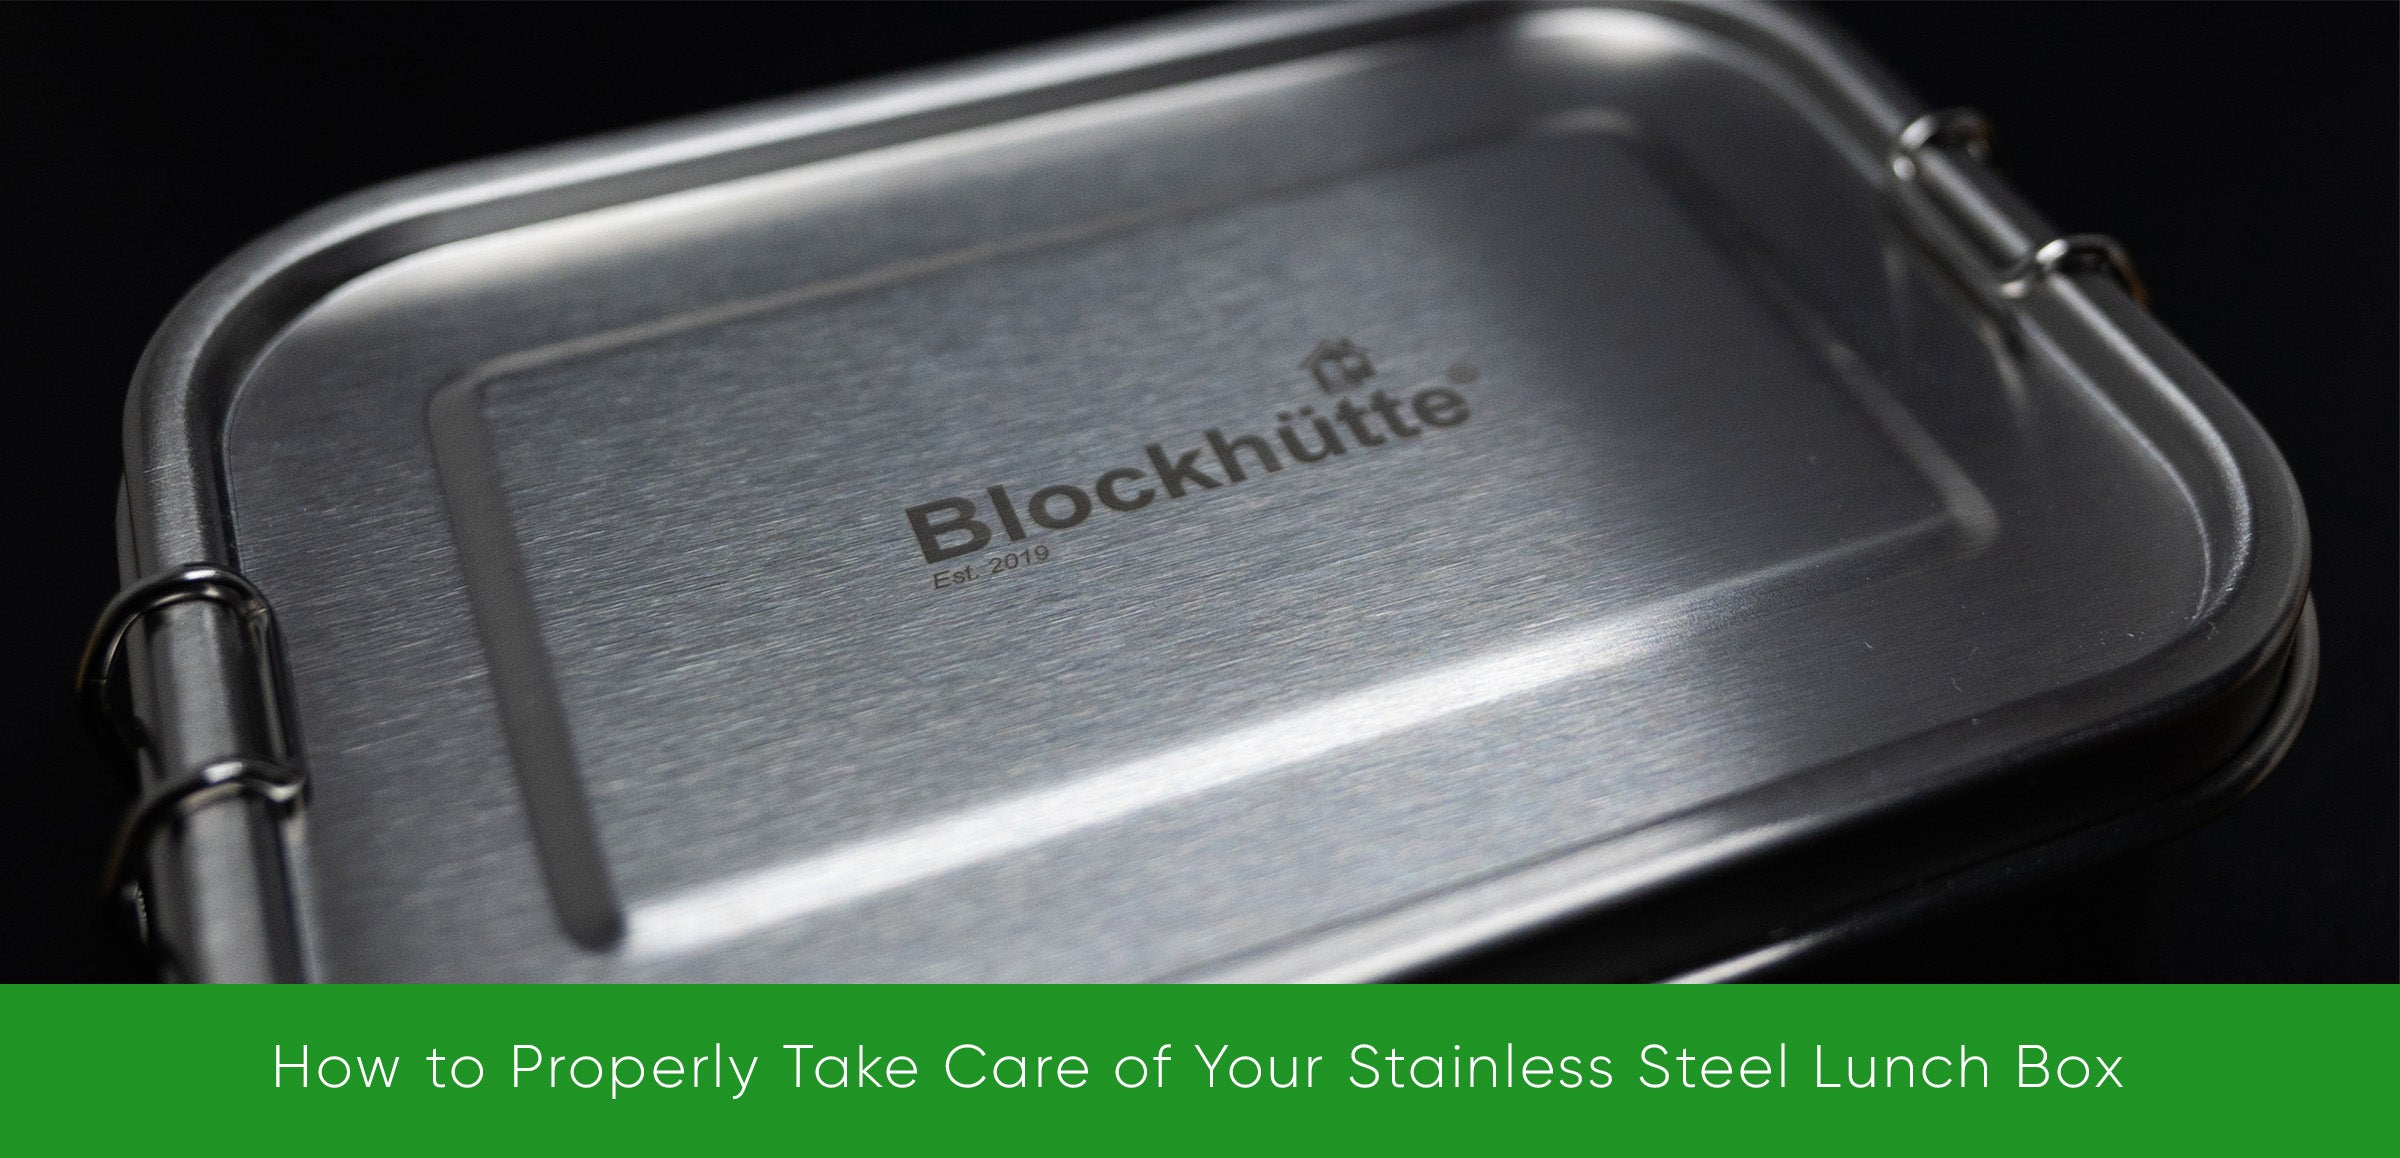 Blockhuette stainless steel lunch box care instructions